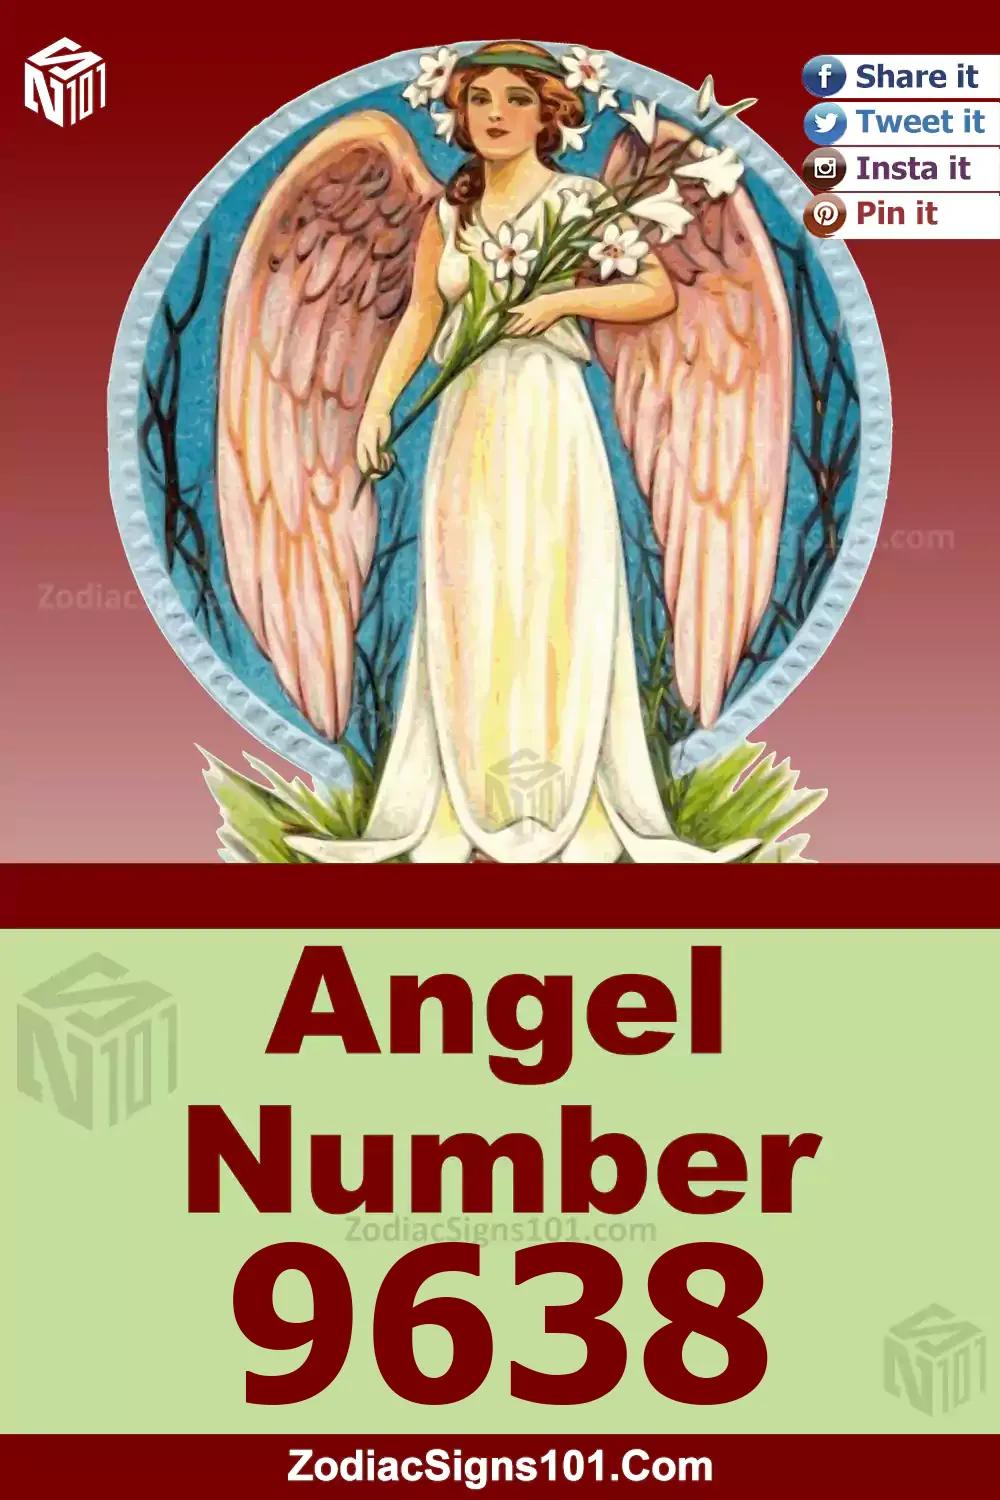 9638 Angel Number Meaning